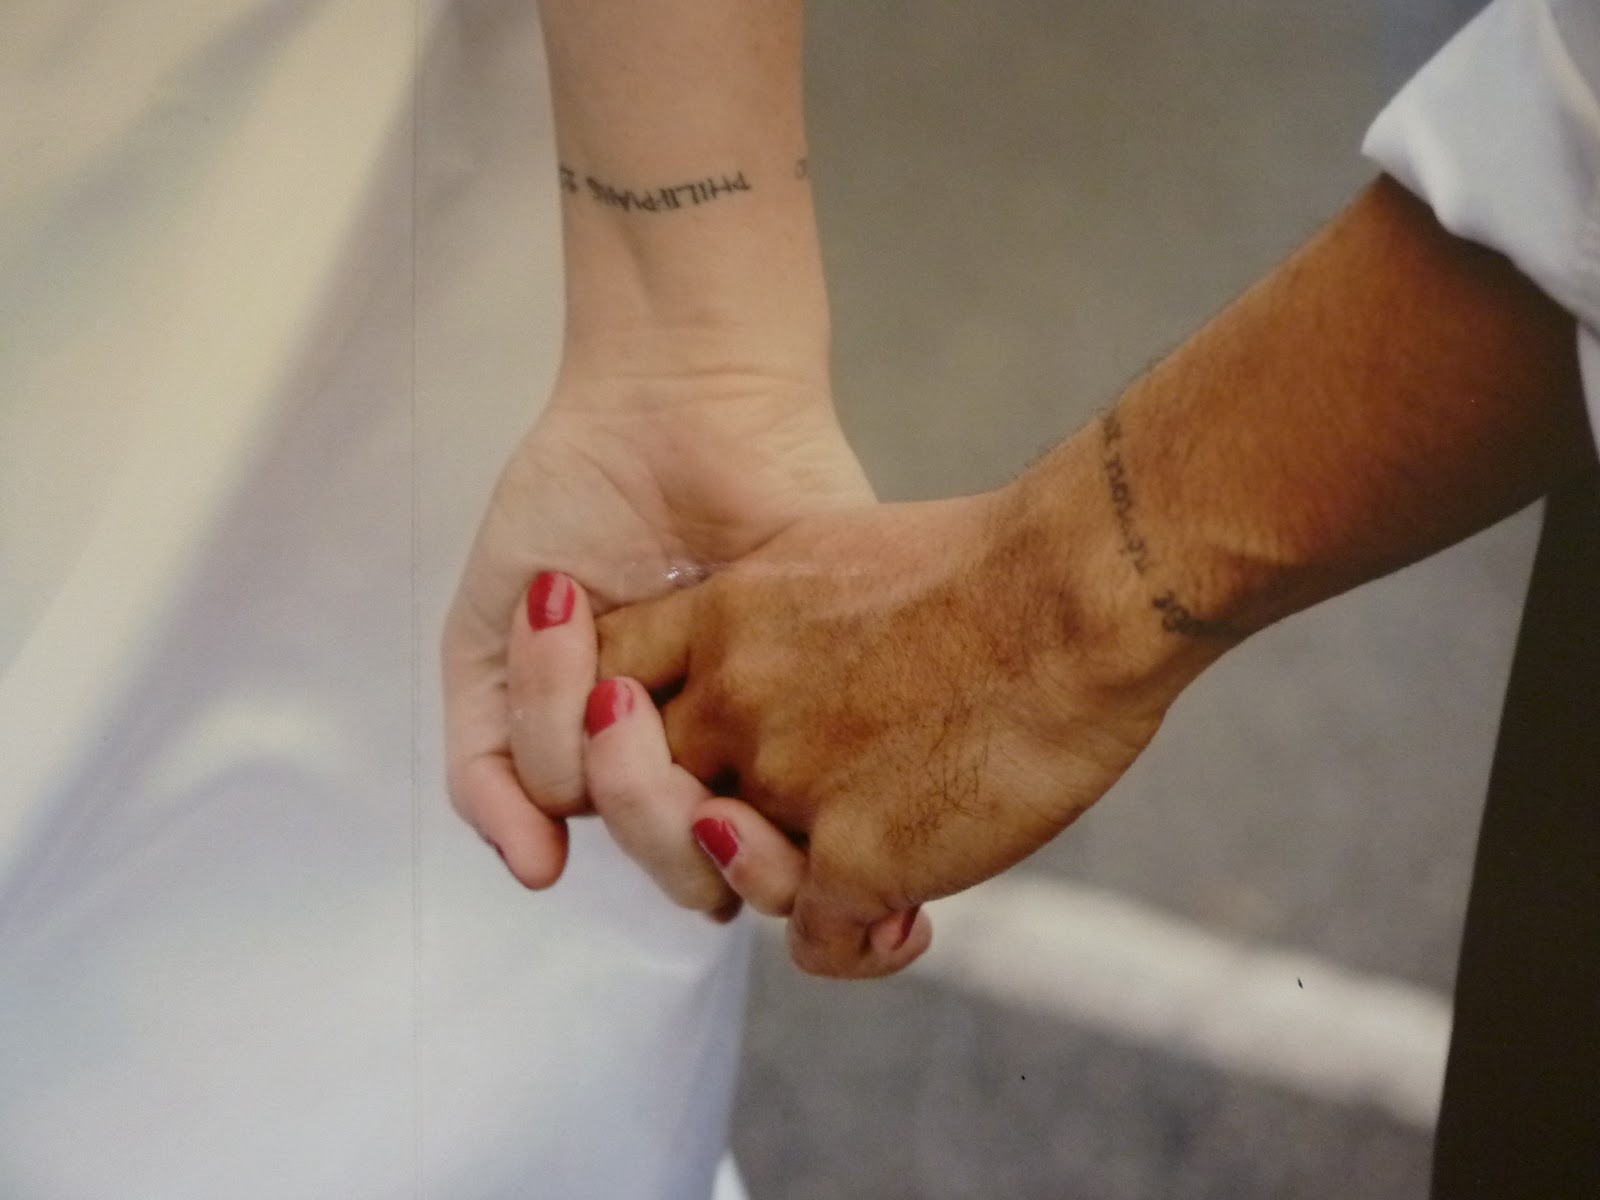 Best Tattoo Ideas For Couples Matching Cool Image HD Photo Galeries